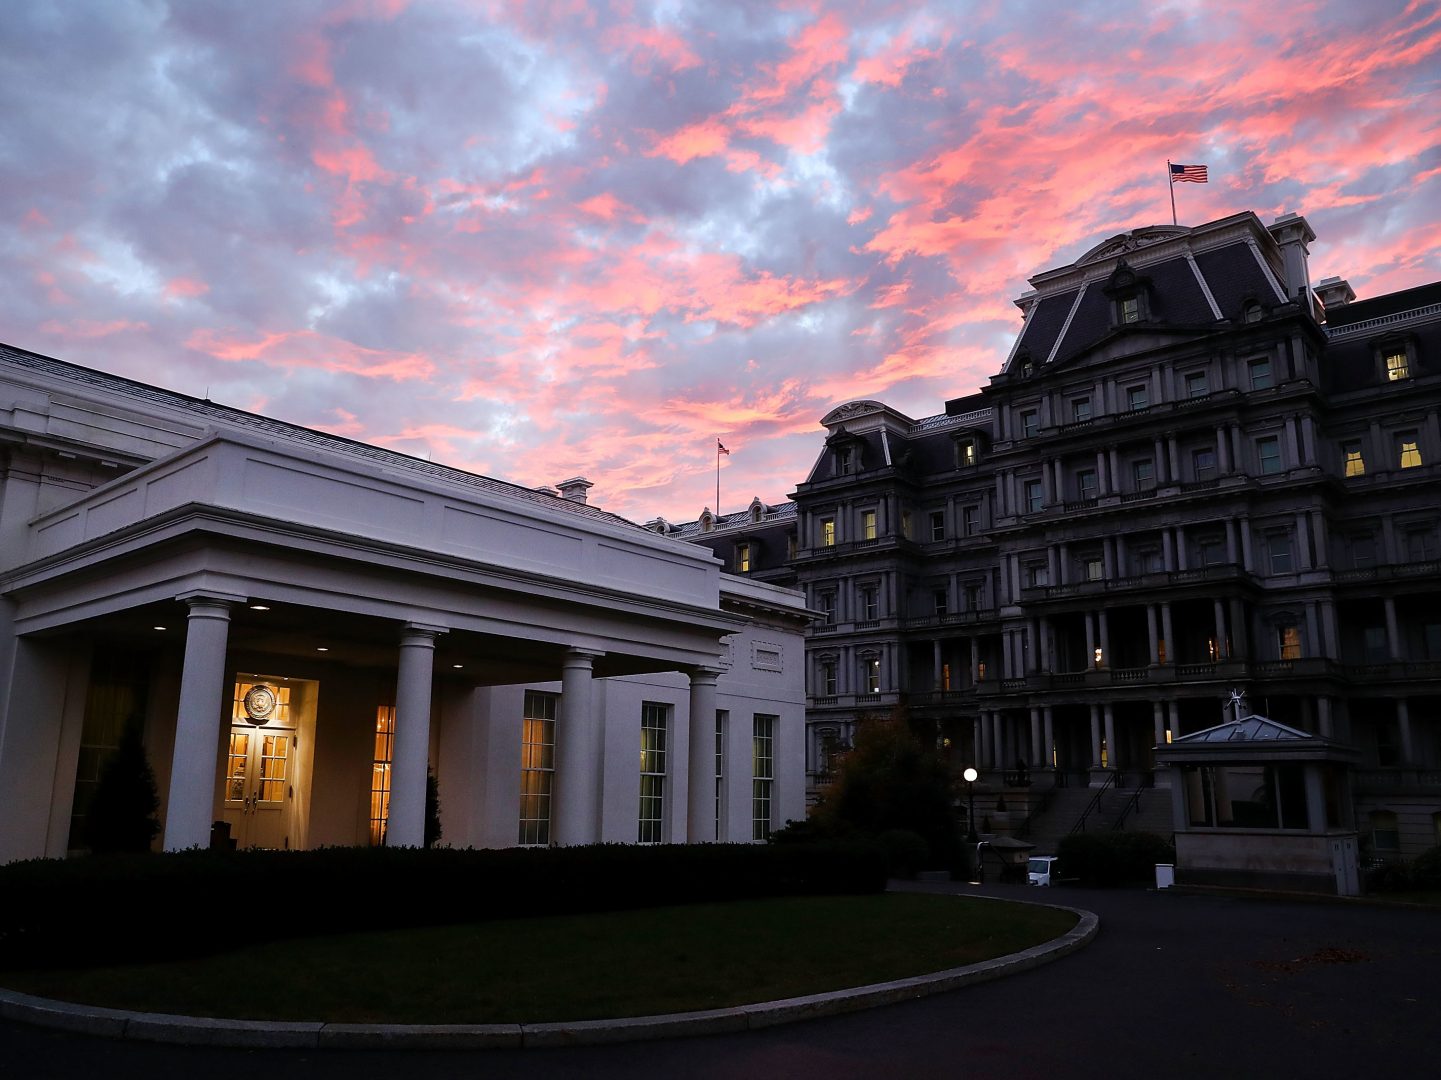 An federal watchdog called the Government Accountability Office (GAO) released its report on Thursday about whether President Trump's actions in the Ukraine affair broke a budget law.